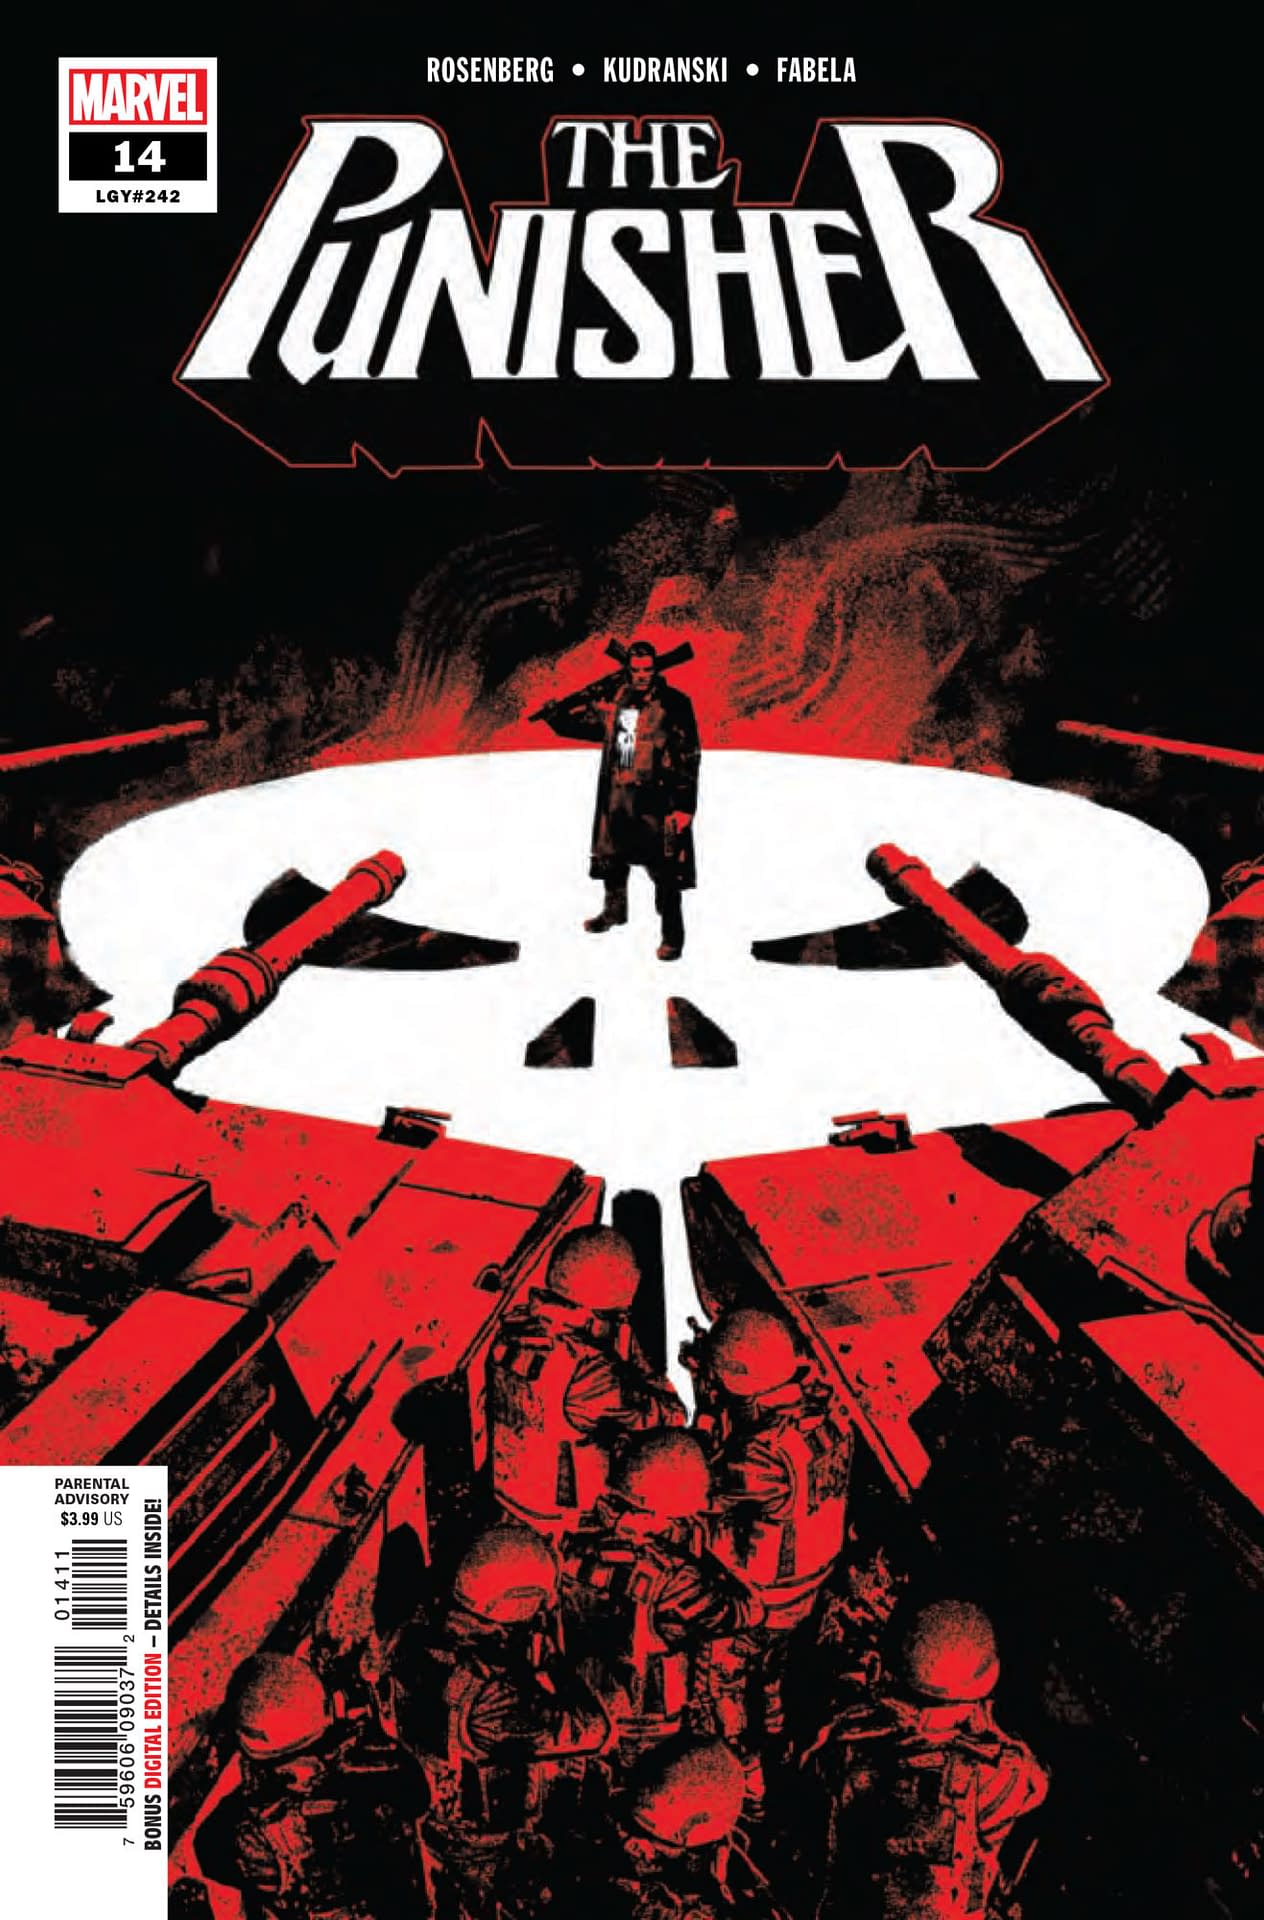 Does Auto Insurance Cover The Punisher? Punisher #14 [Preview]